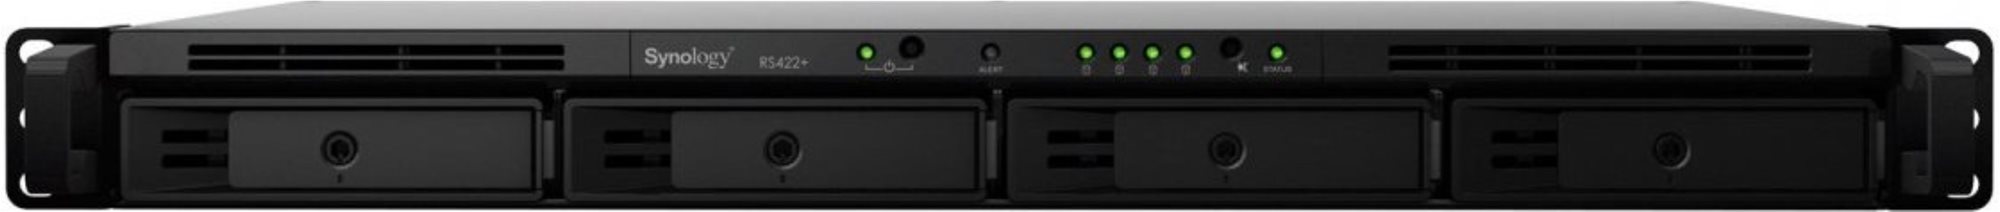 Synology rs422+